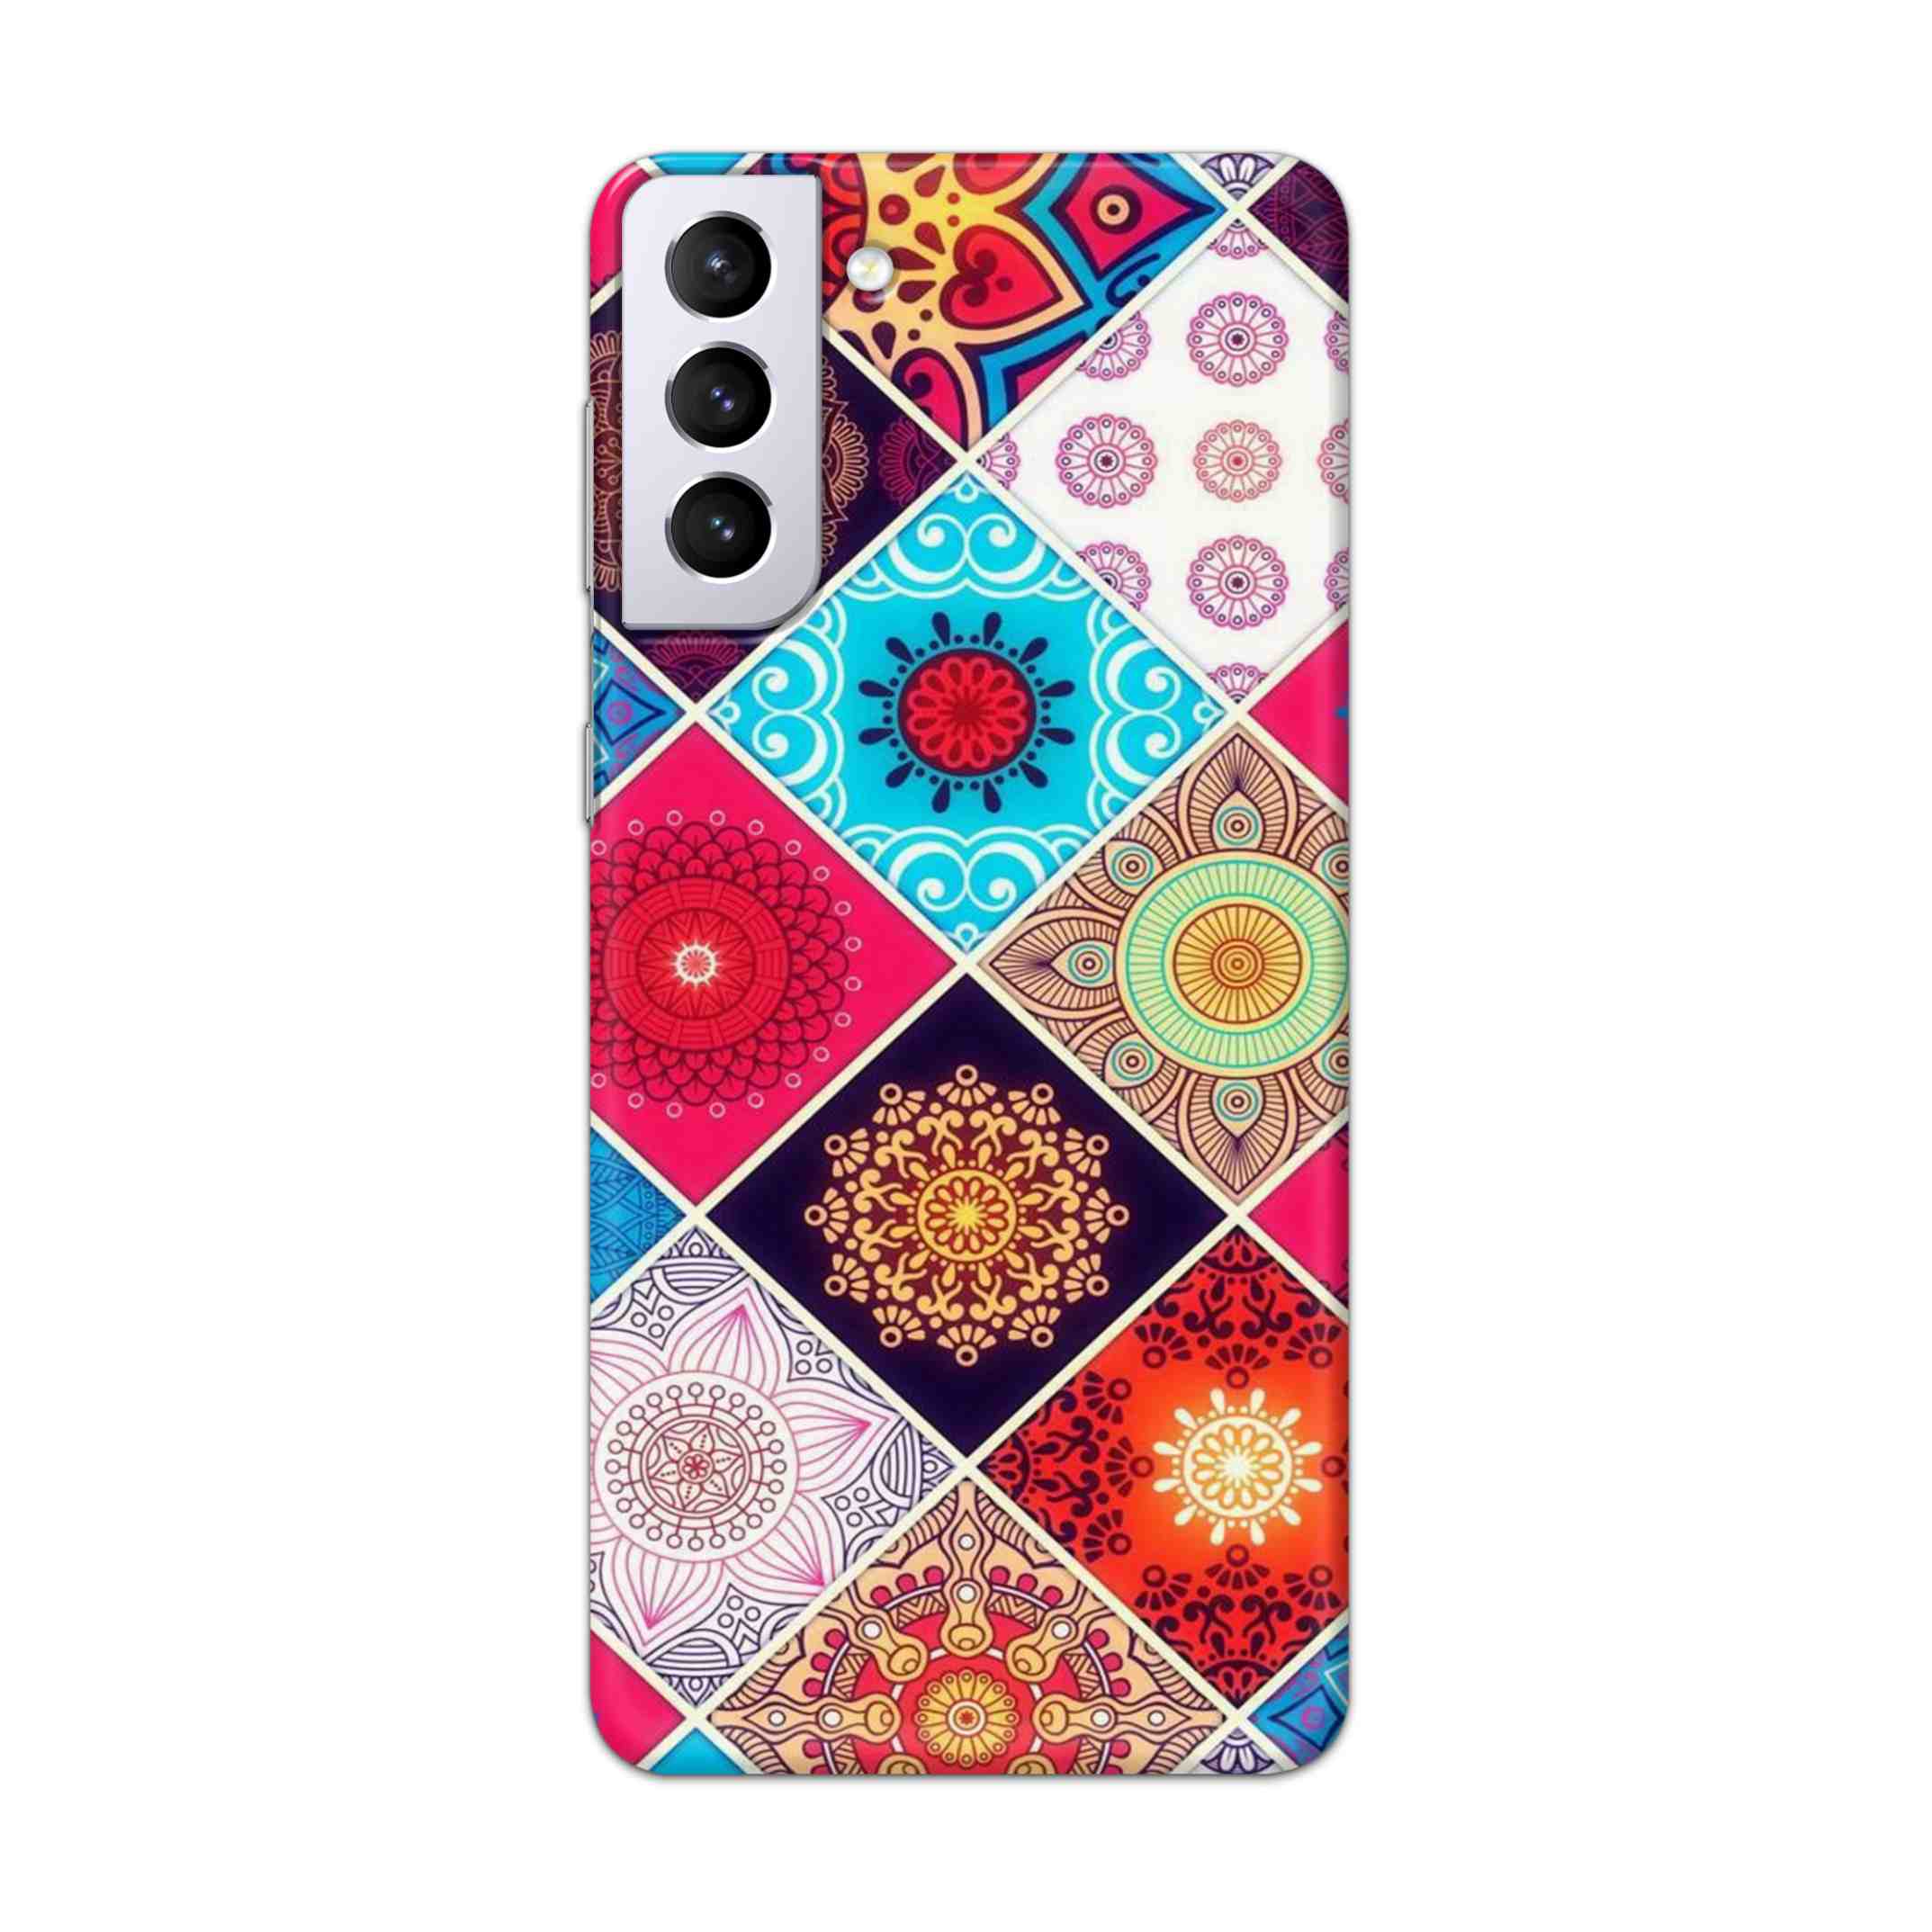 Buy Rainbow Mandala Hard Back Mobile Phone Case Cover For Samsung Galaxy S21 Plus Online